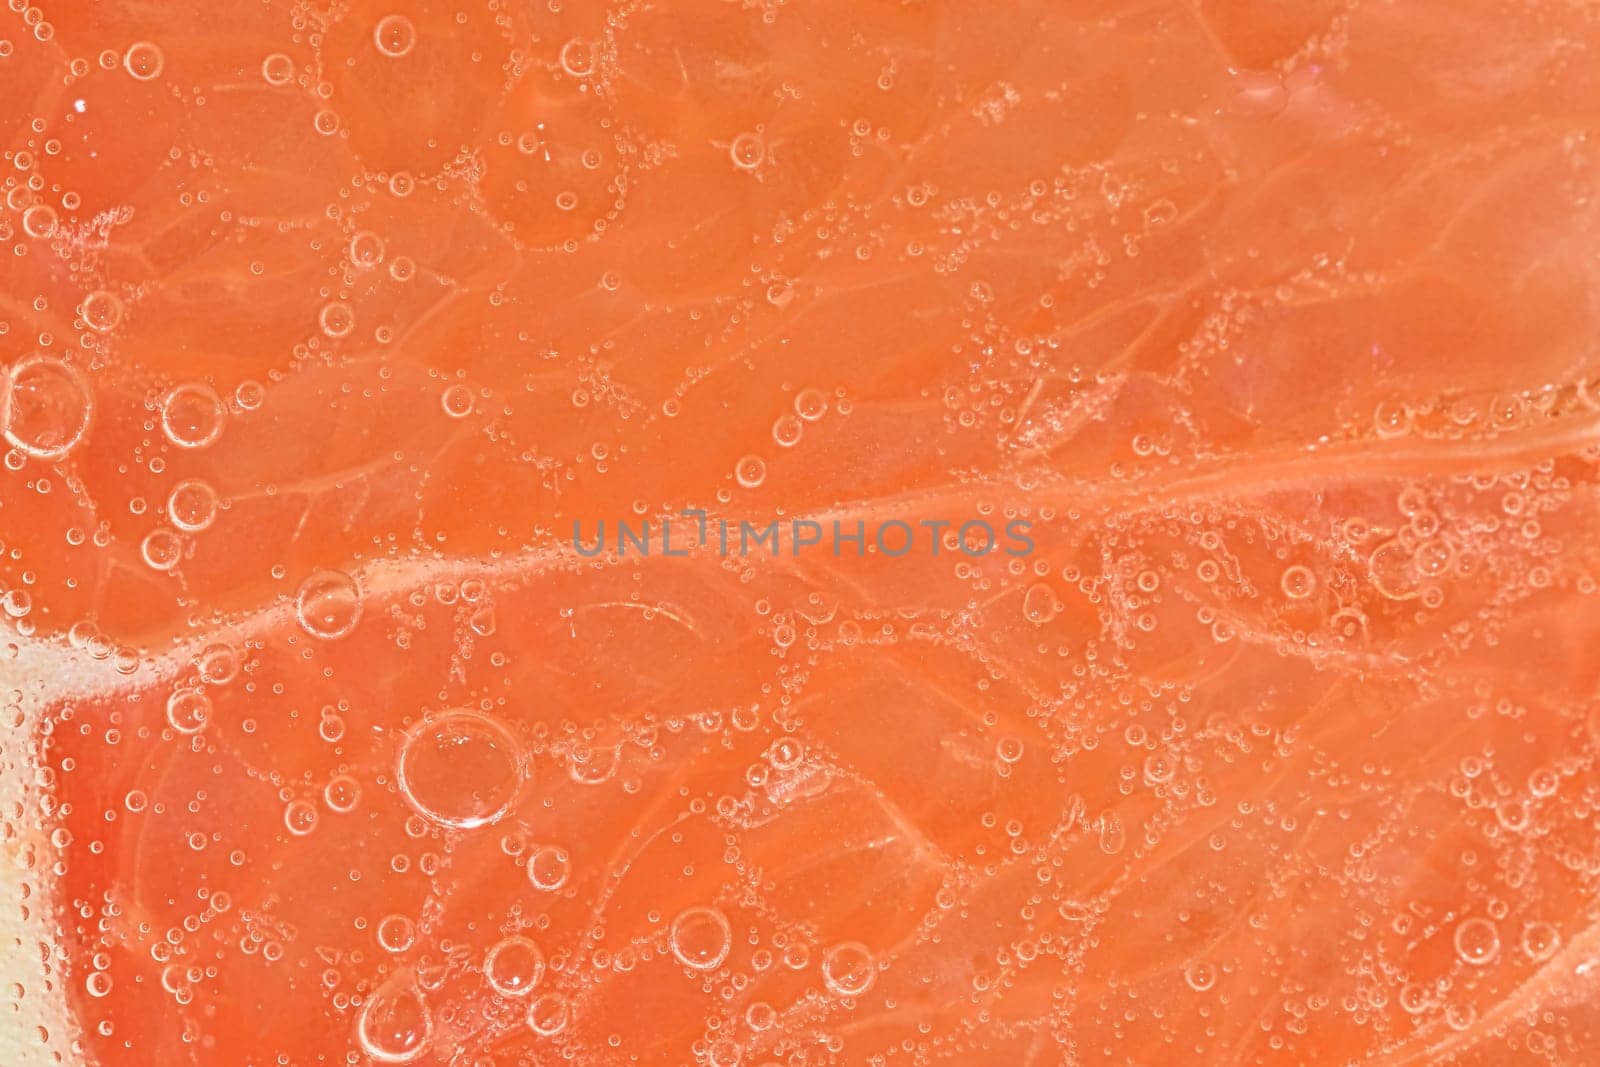 Close-up of a grapefruit slice in liquid with bubbles. Slice of ripe grapefruit in water. Close-up of fresh grapefruit slice covered by bubbles. Macro horizontal image